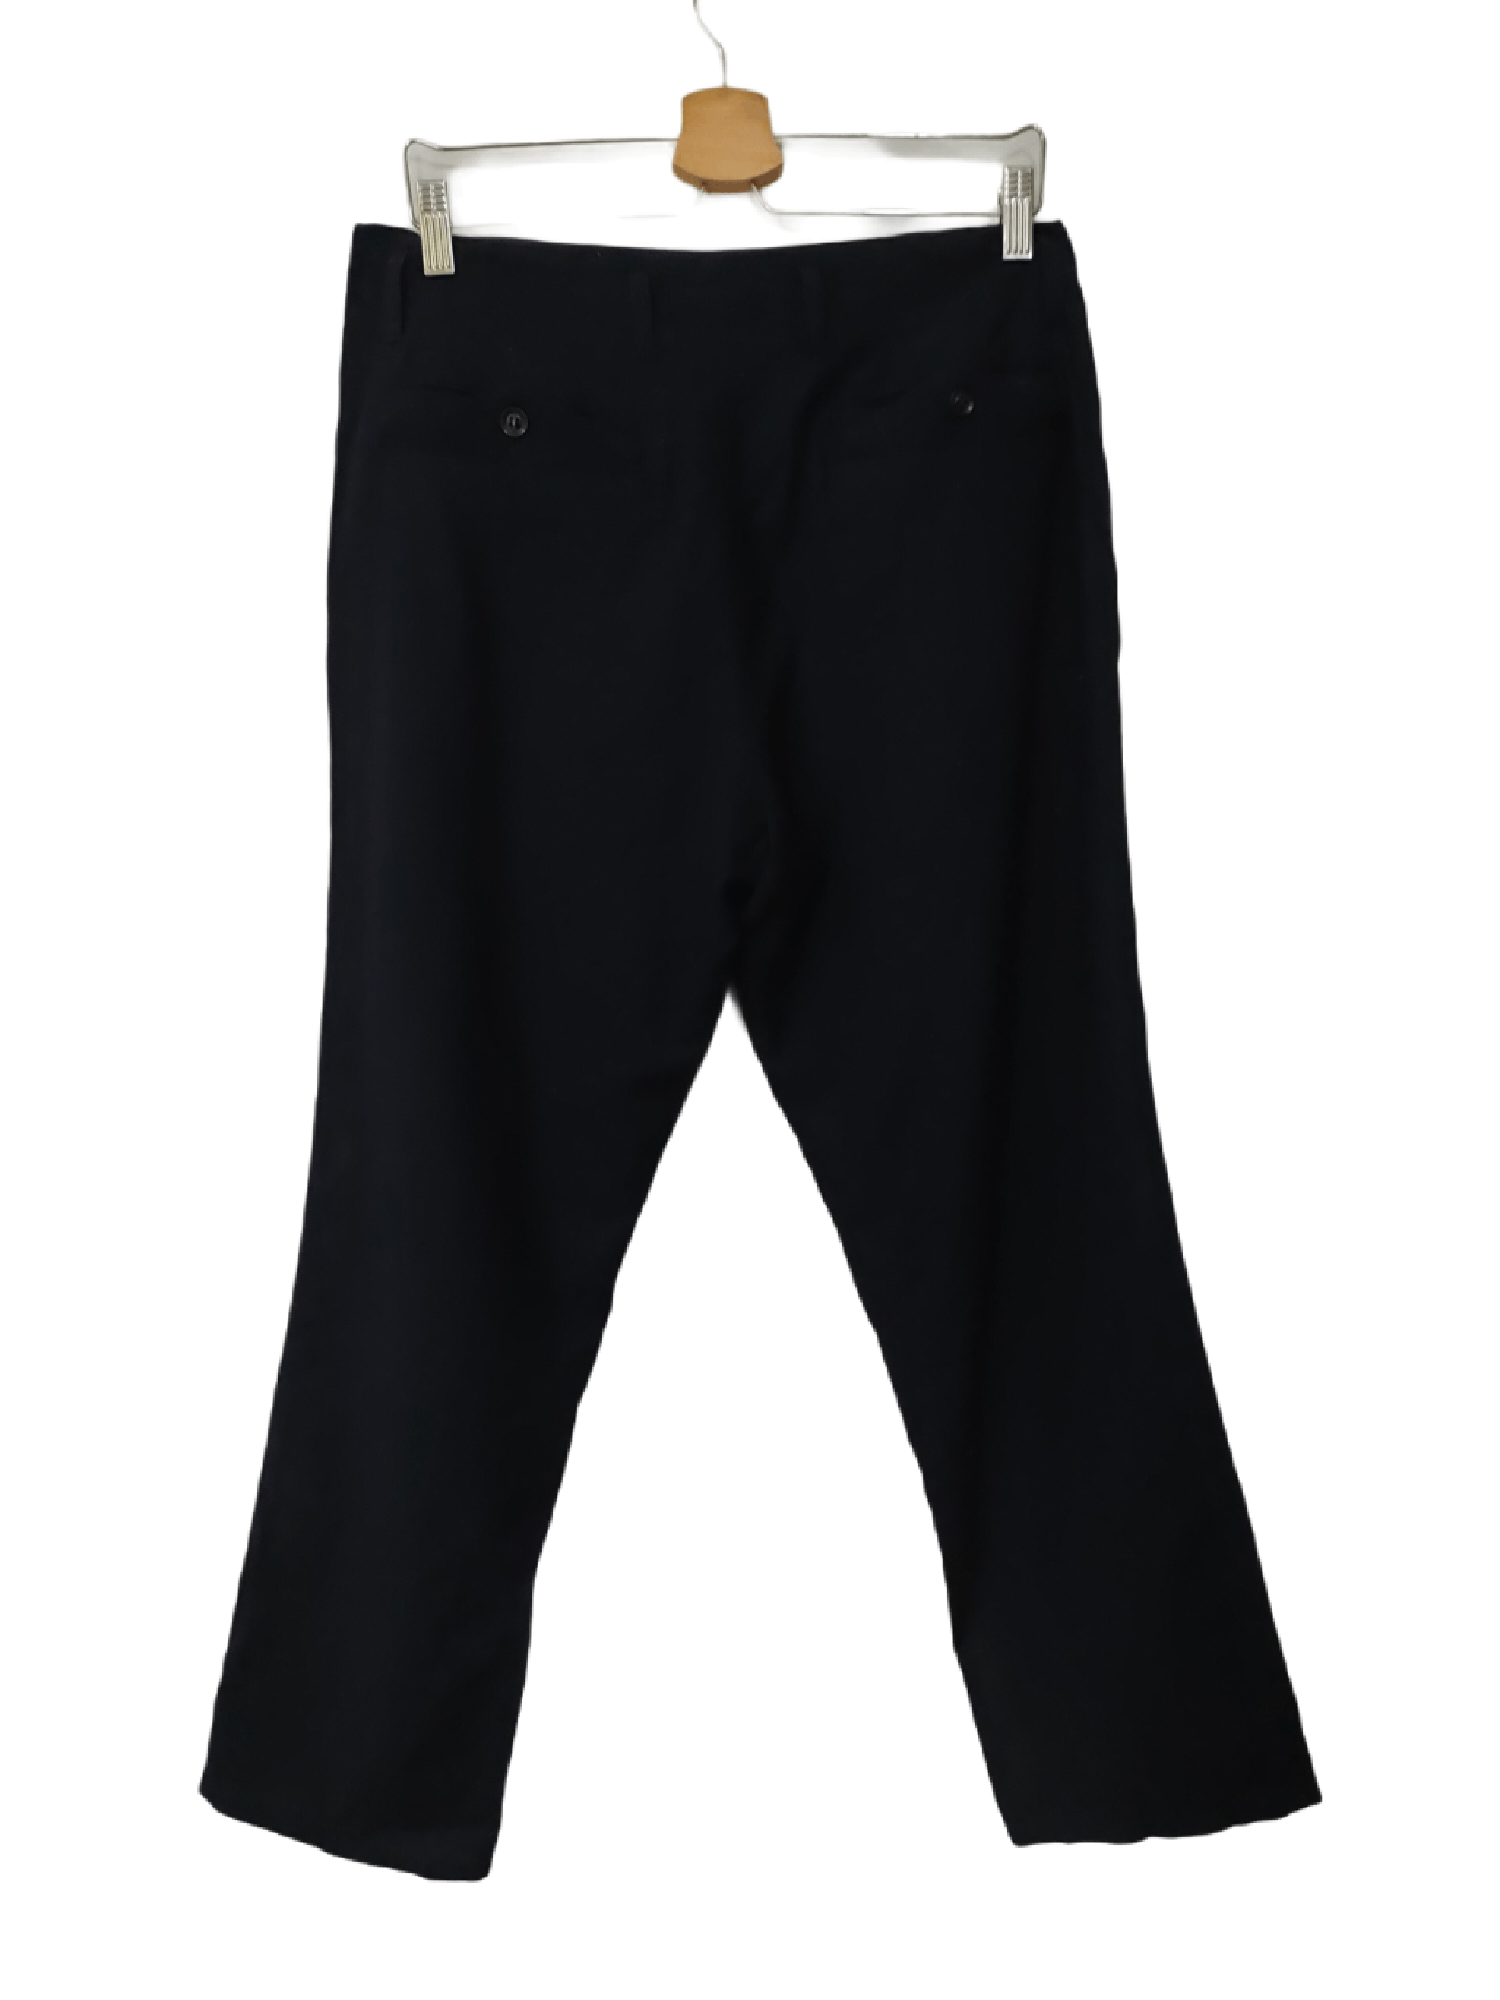 A.P.C. NEW WOOL NAVY BLUE CASUAL PANTS - 4